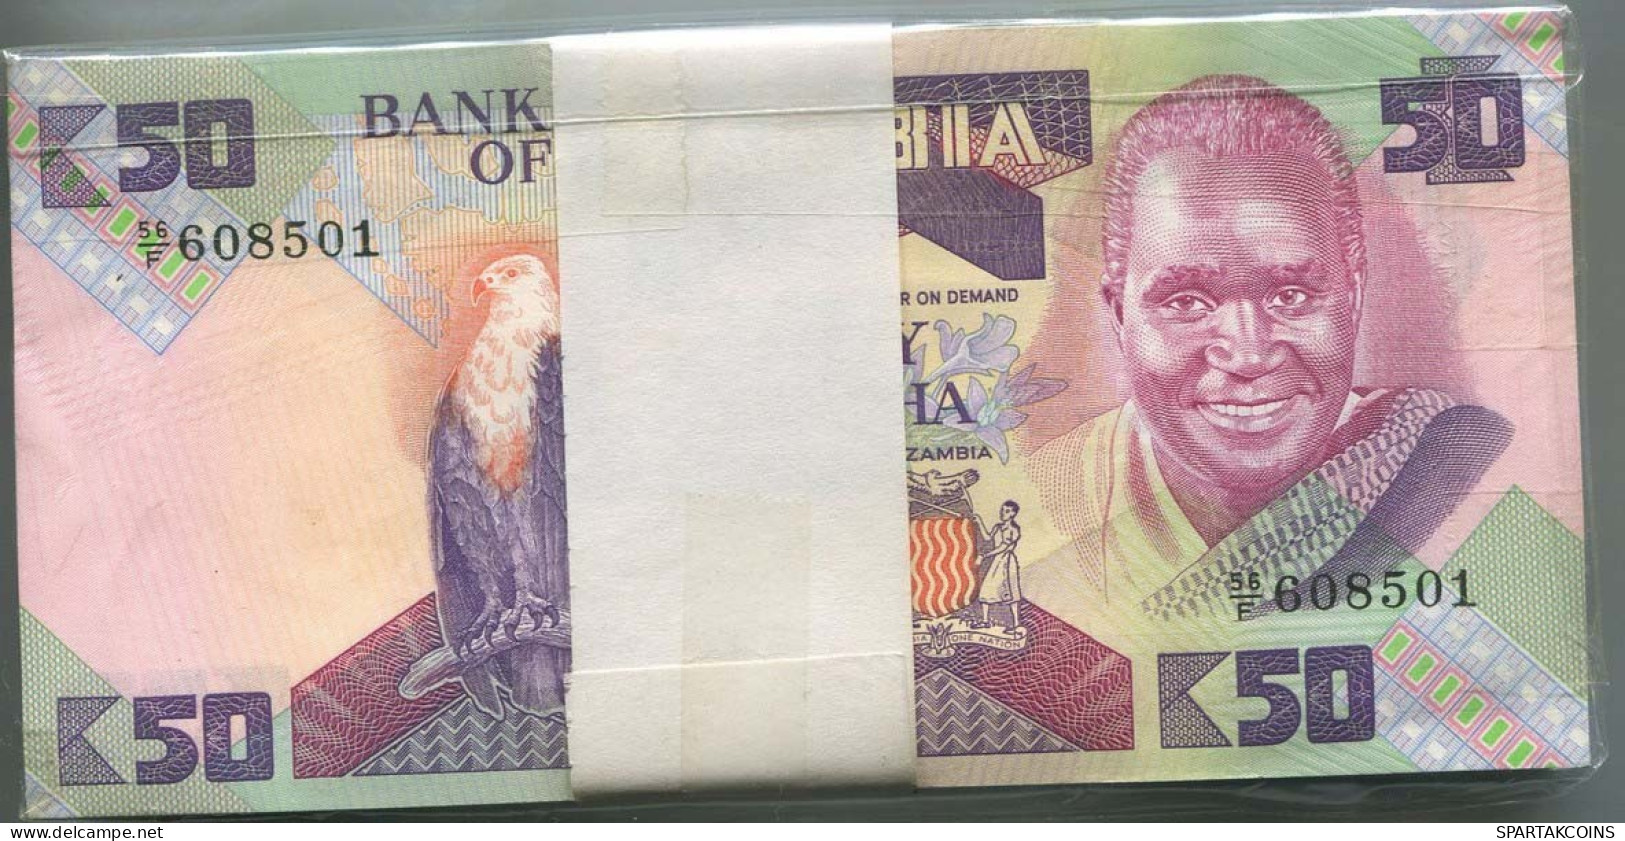 ZAMBIA 50 KWACHA 1986-1988 Paper Money Banknote #P10115.V - [11] Local Banknote Issues